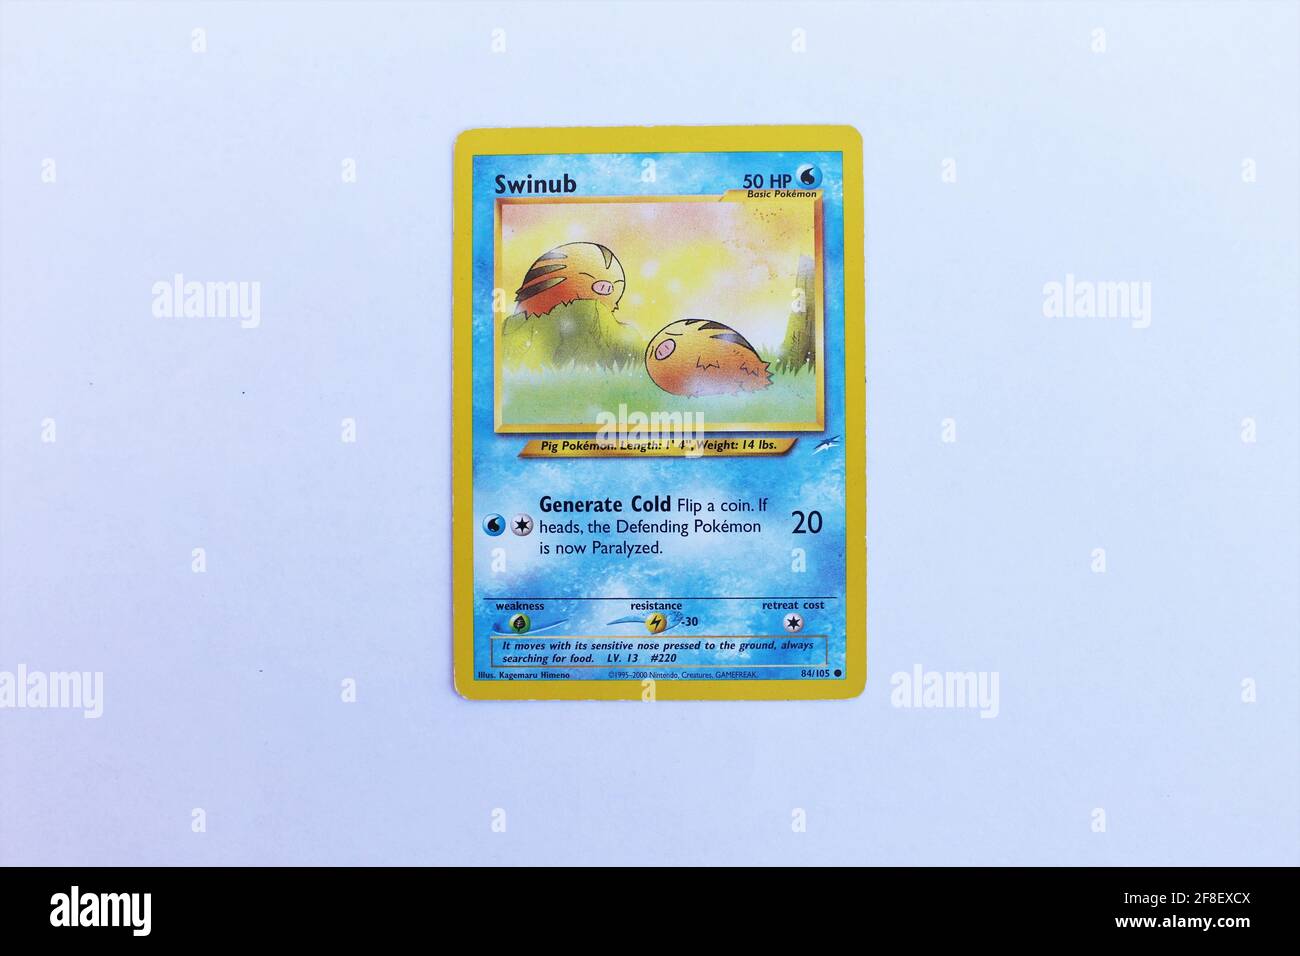 Swinub Pokemon card front side The Pokémon Trading Card Game is a collectible card game based on Nintendo's Pokémon franchise of video games and anime Stock Photo